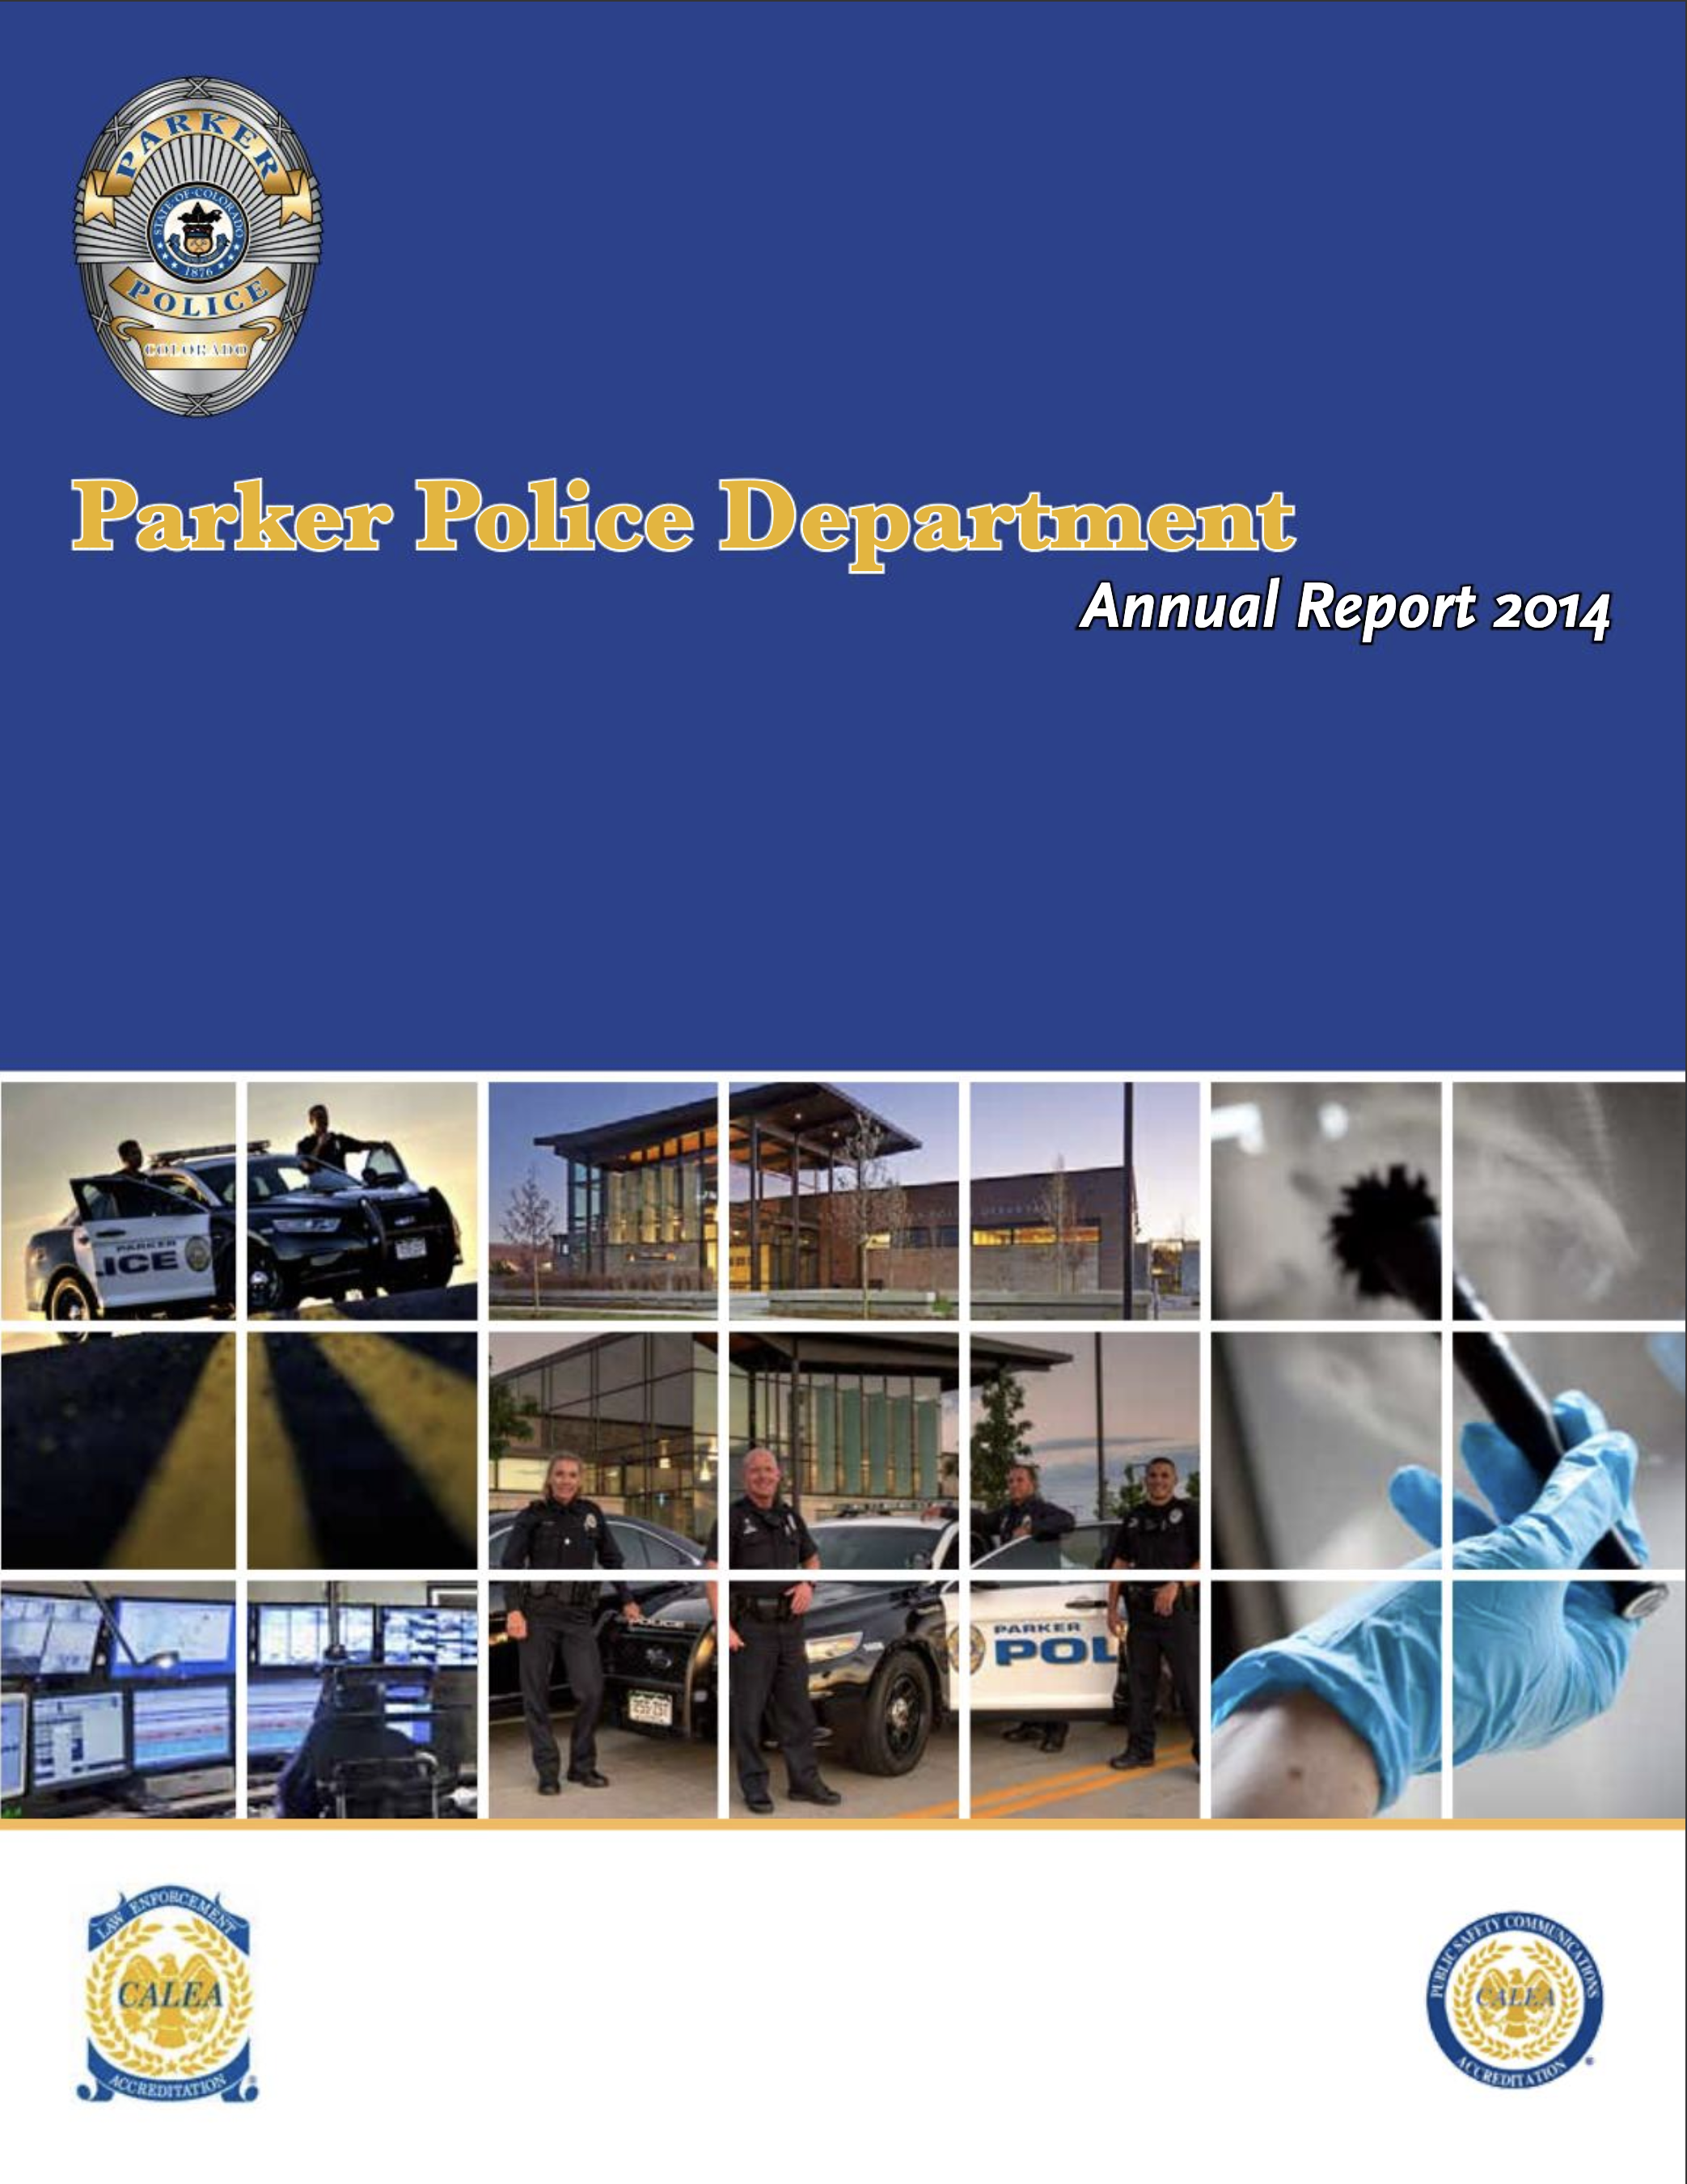 Parker Police Department Annual Report 2014